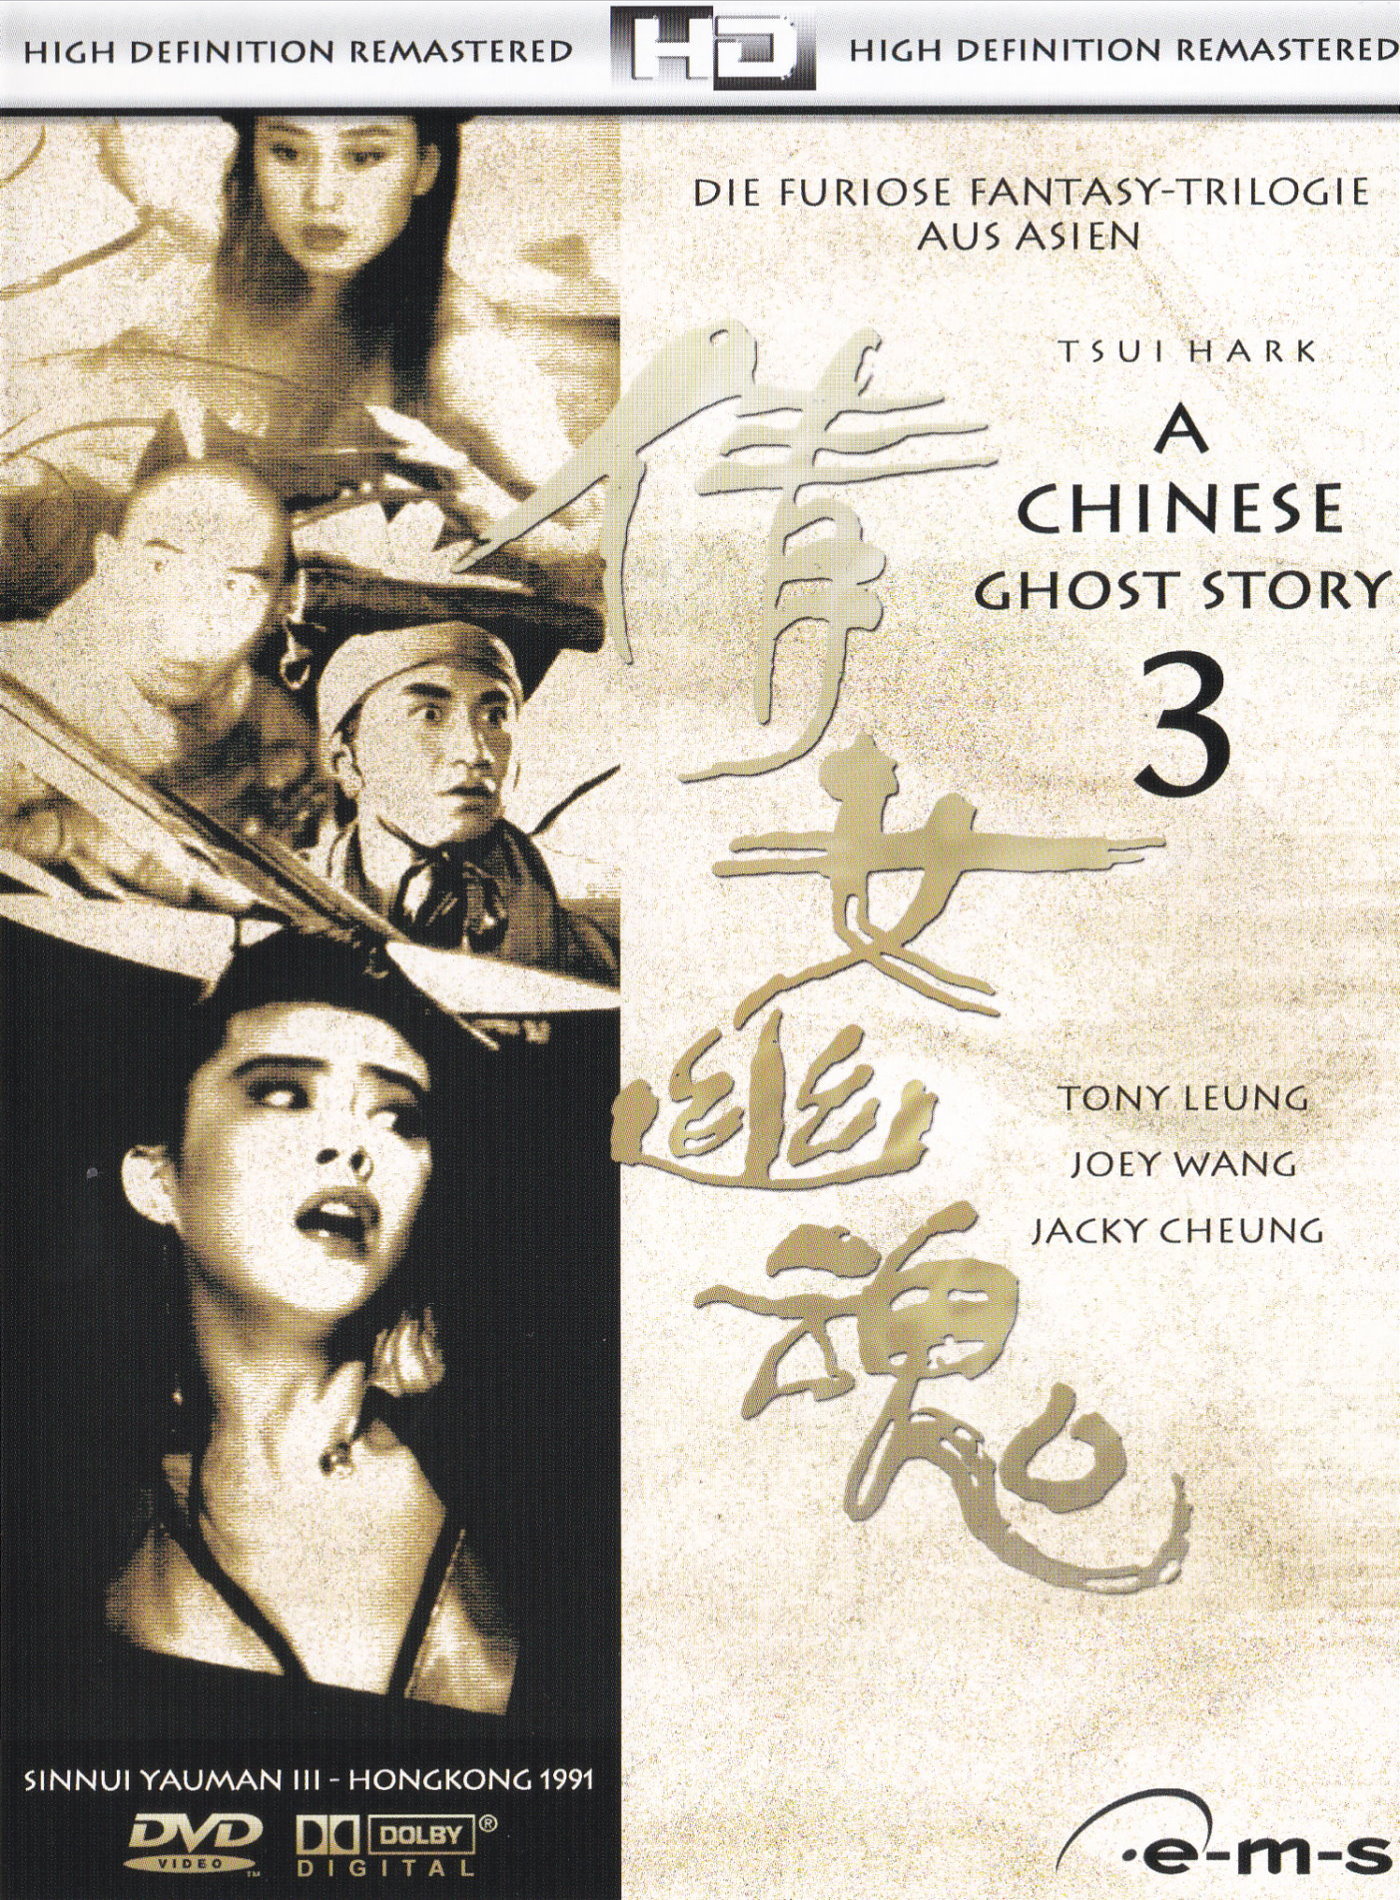 Cover - A Chinese Ghost Story 3.jpg